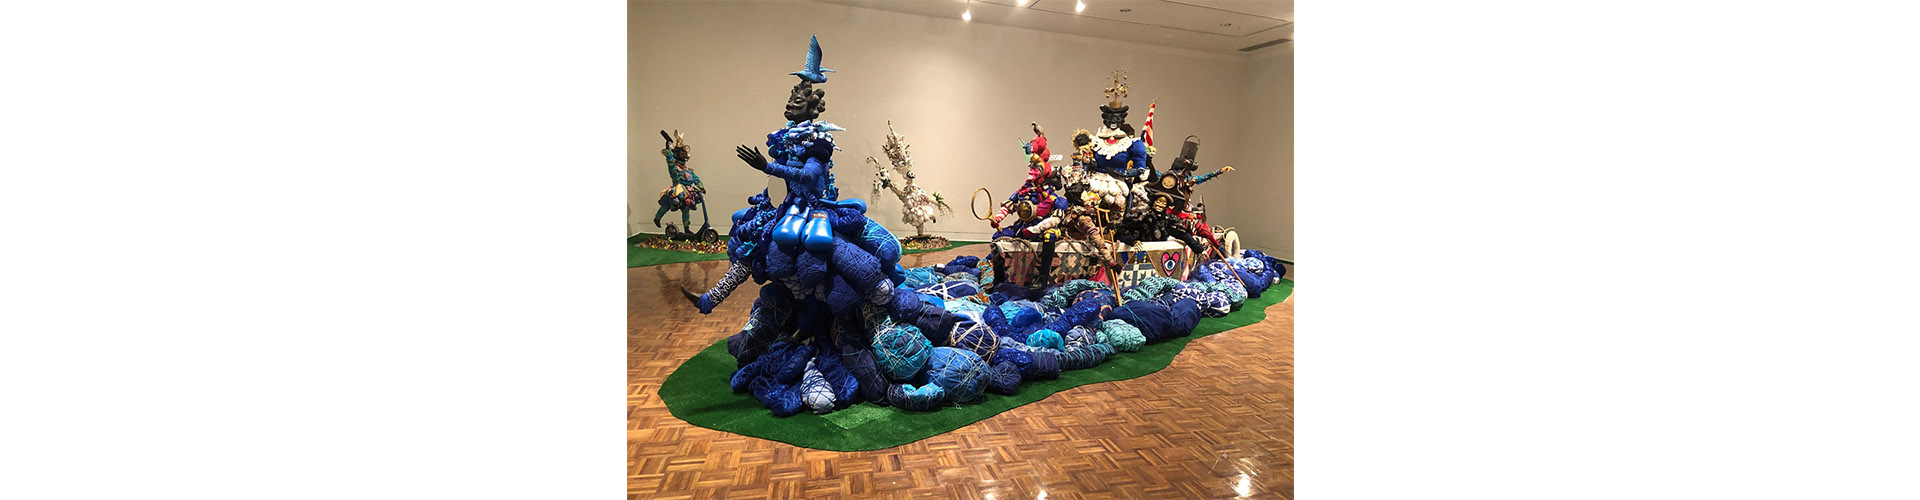 vanessa german, "Miracles and Glory Abound", 2018, mixed media assemblages. Installation view at Flint Institute of Arts. Dimensions variable. Courtesy of the artist and Kasmin Gallery, NYC. Photo courtesy of Heather Jackson, Flint Institute of Arts 